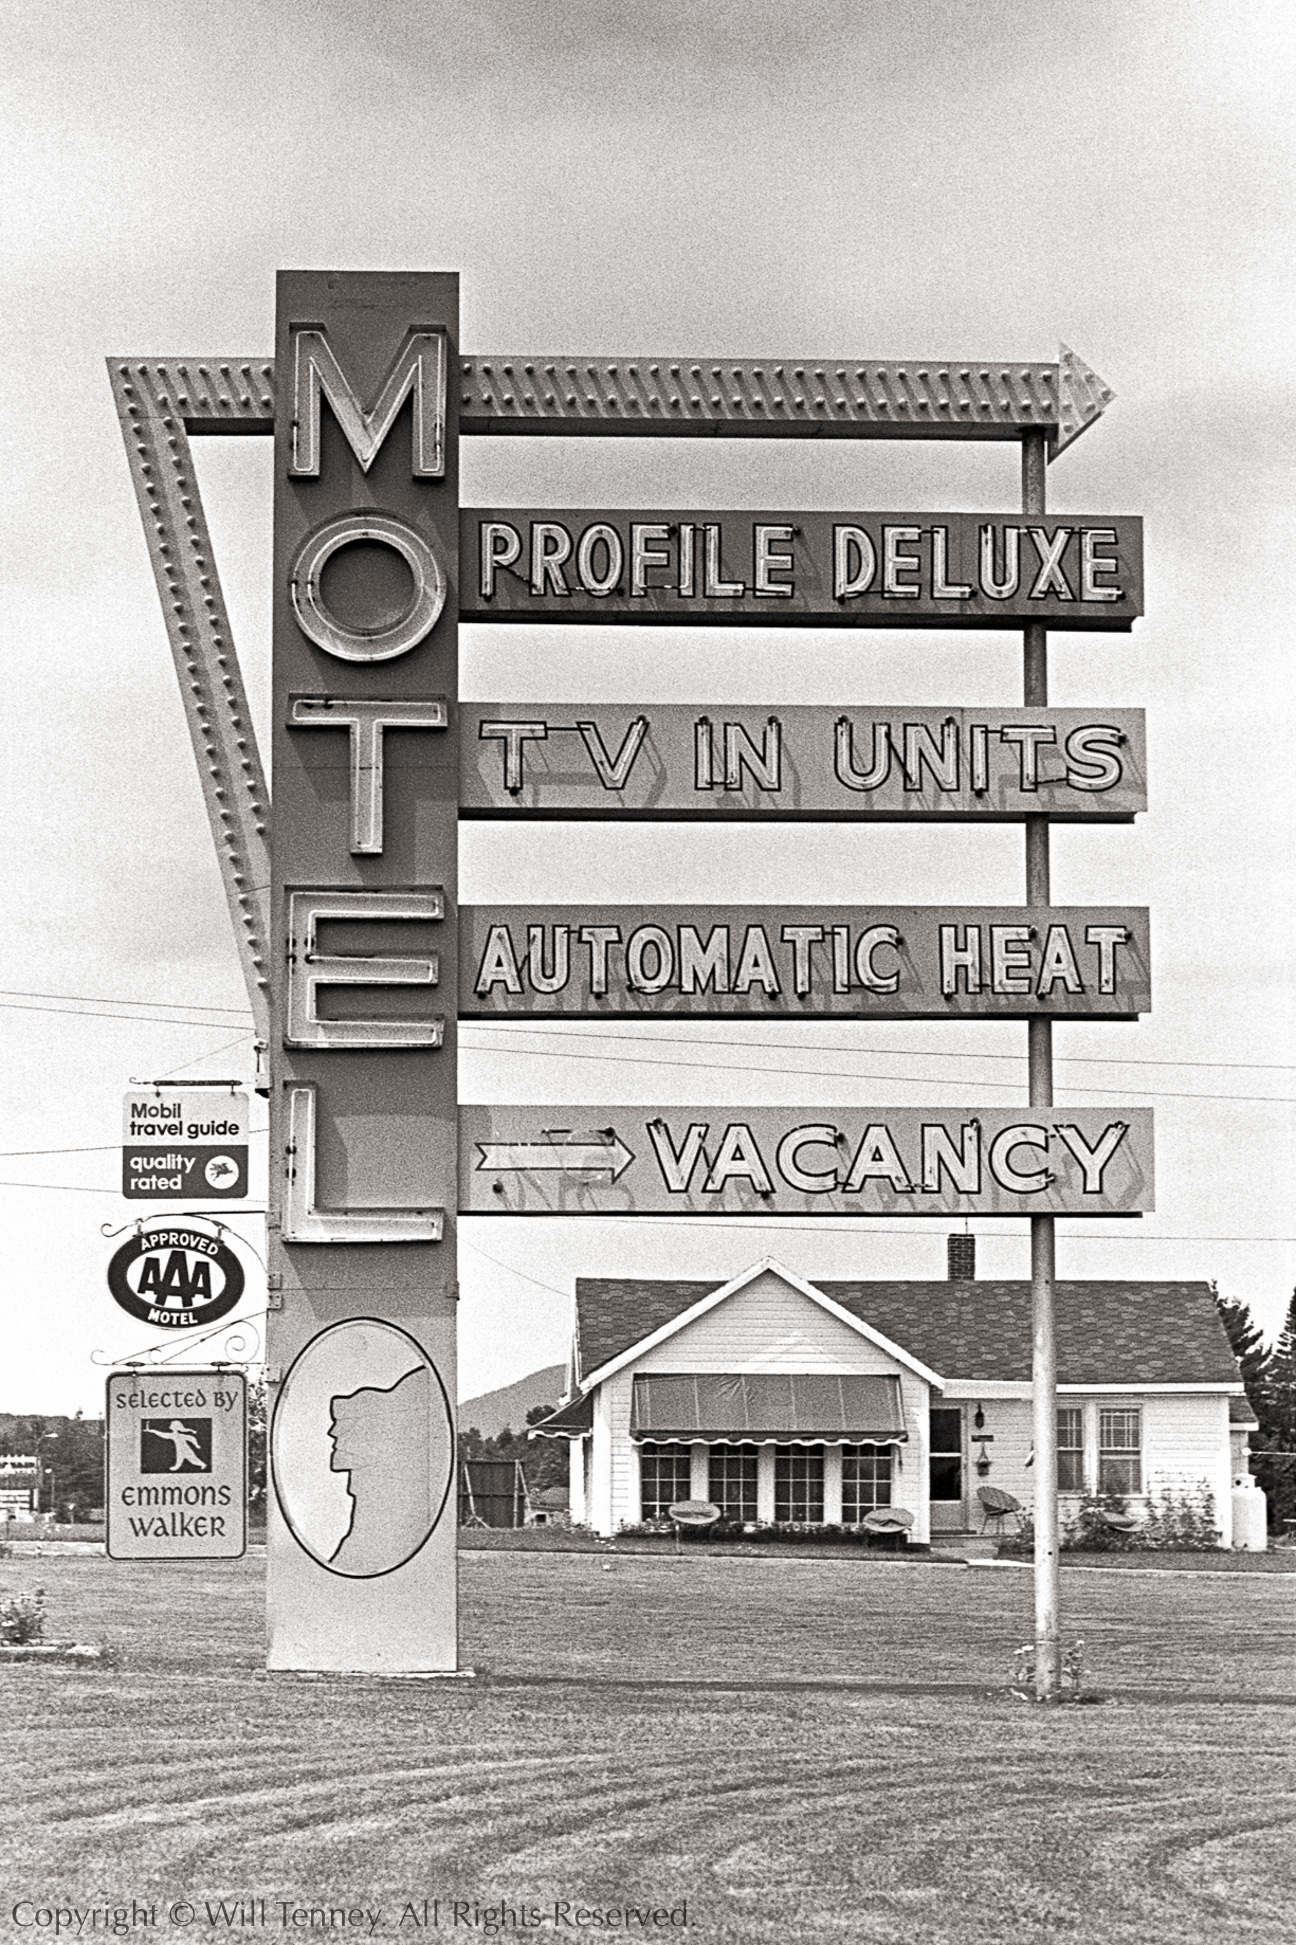 Profile Deluxe Motel: Photograph by Will Tenney